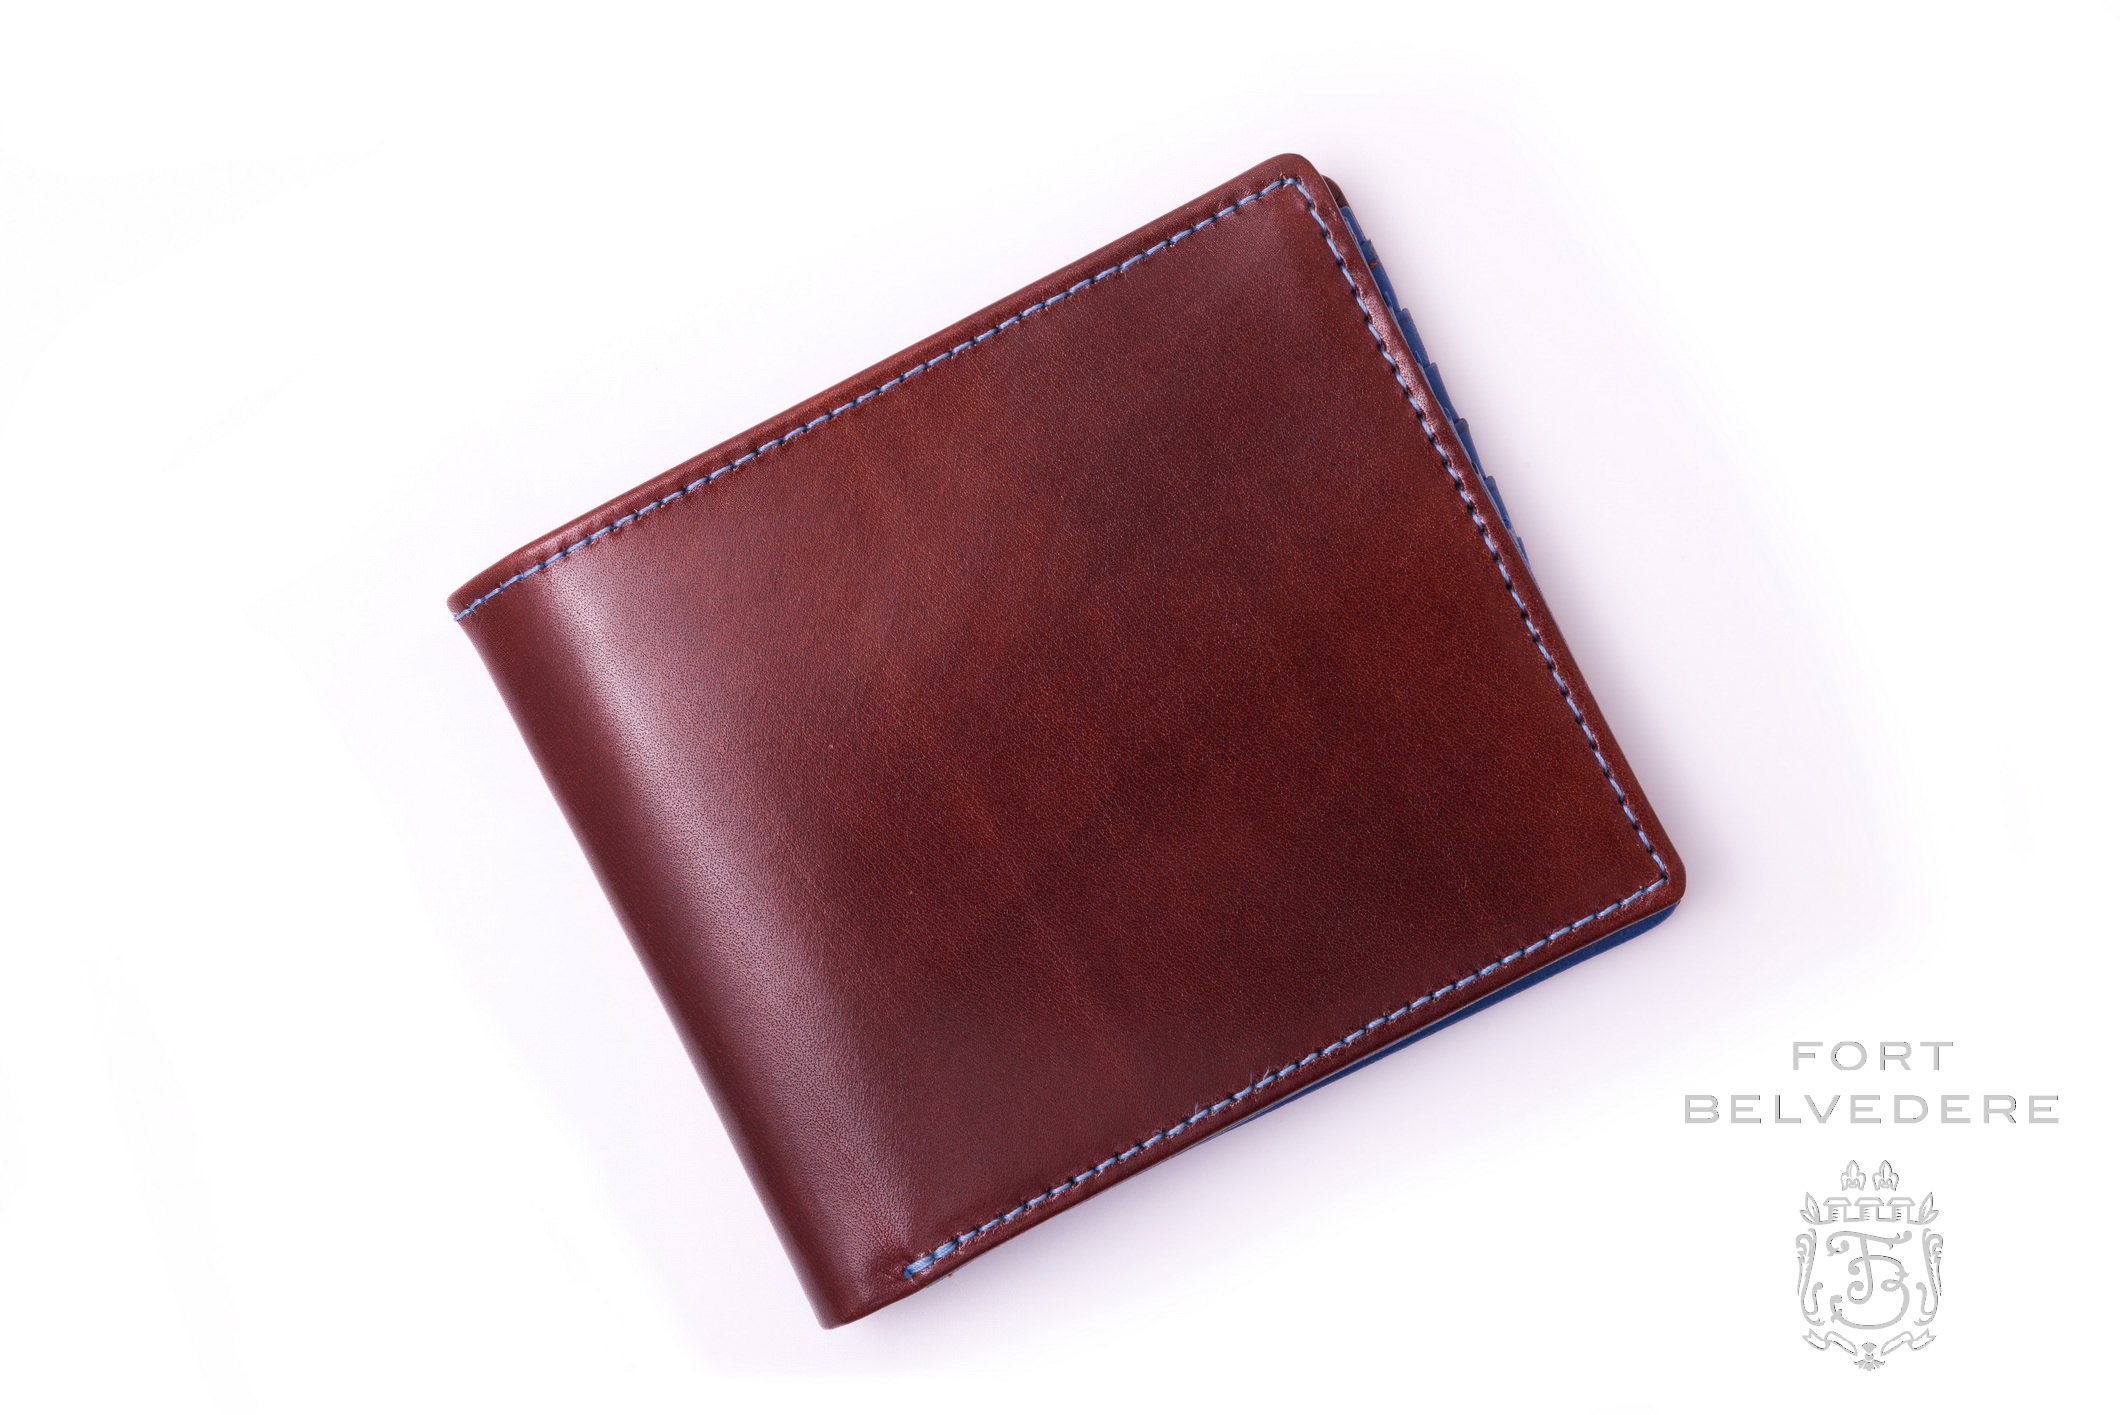 Luxury Men's Leather Wallet in Whisky Patina Brown Boxcalf & Blue ...